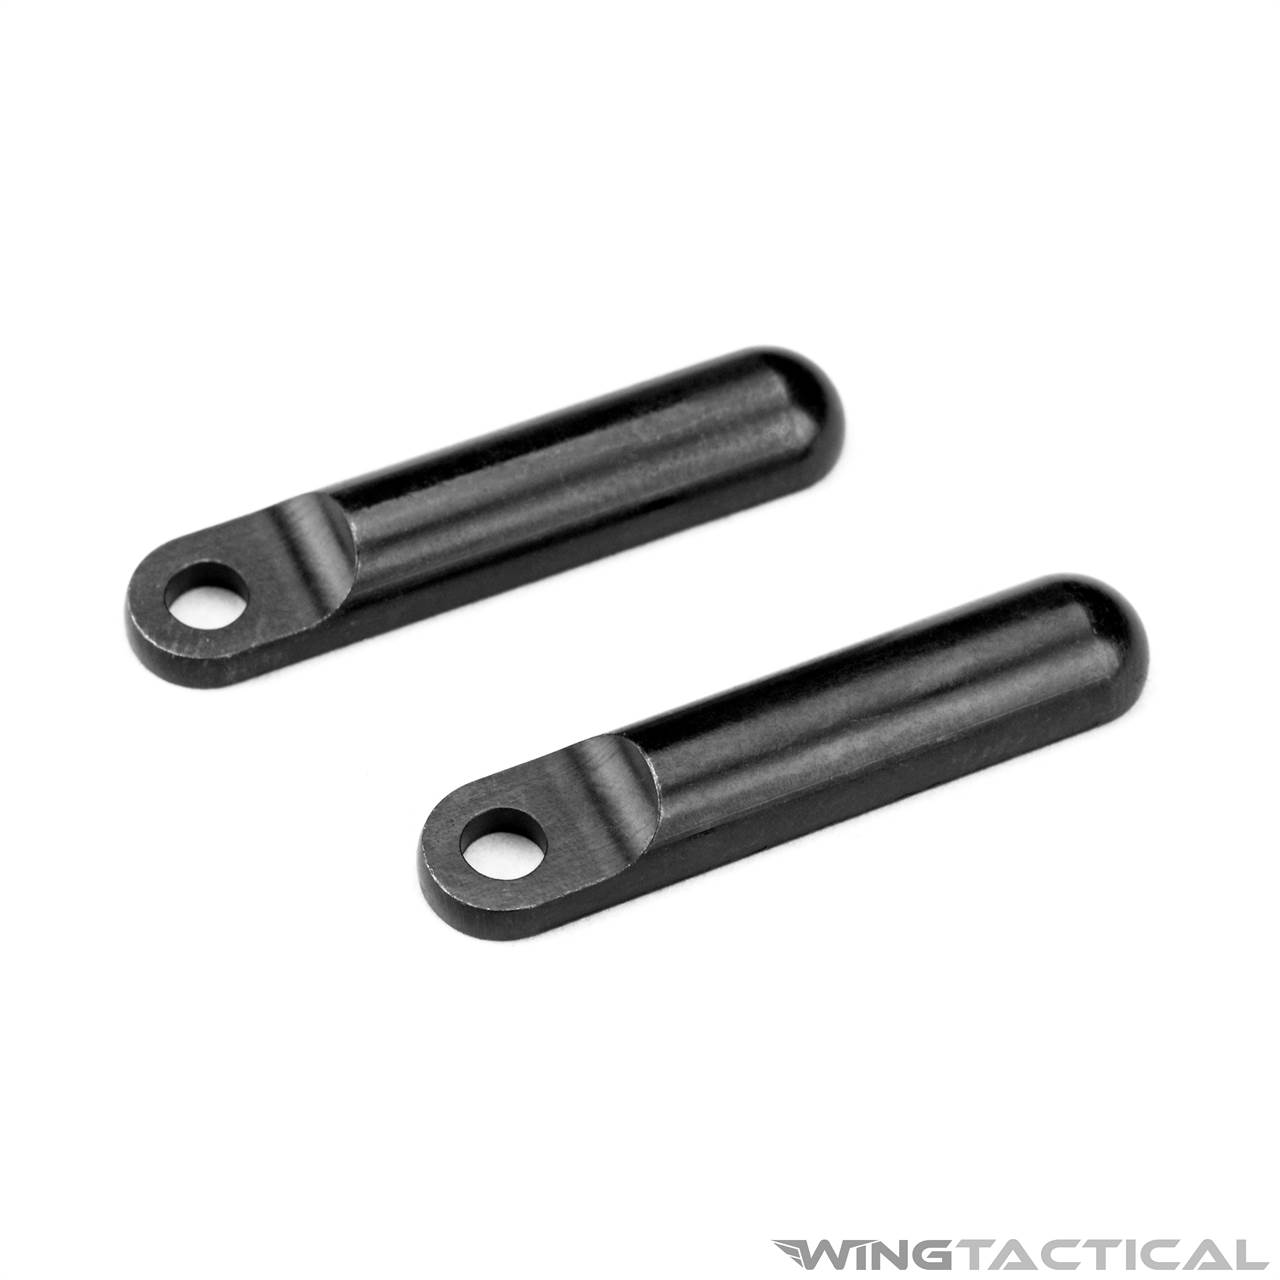 KNS Non-Rotating Trigger/Hammer Pins, .1555 Diamater - Midwest